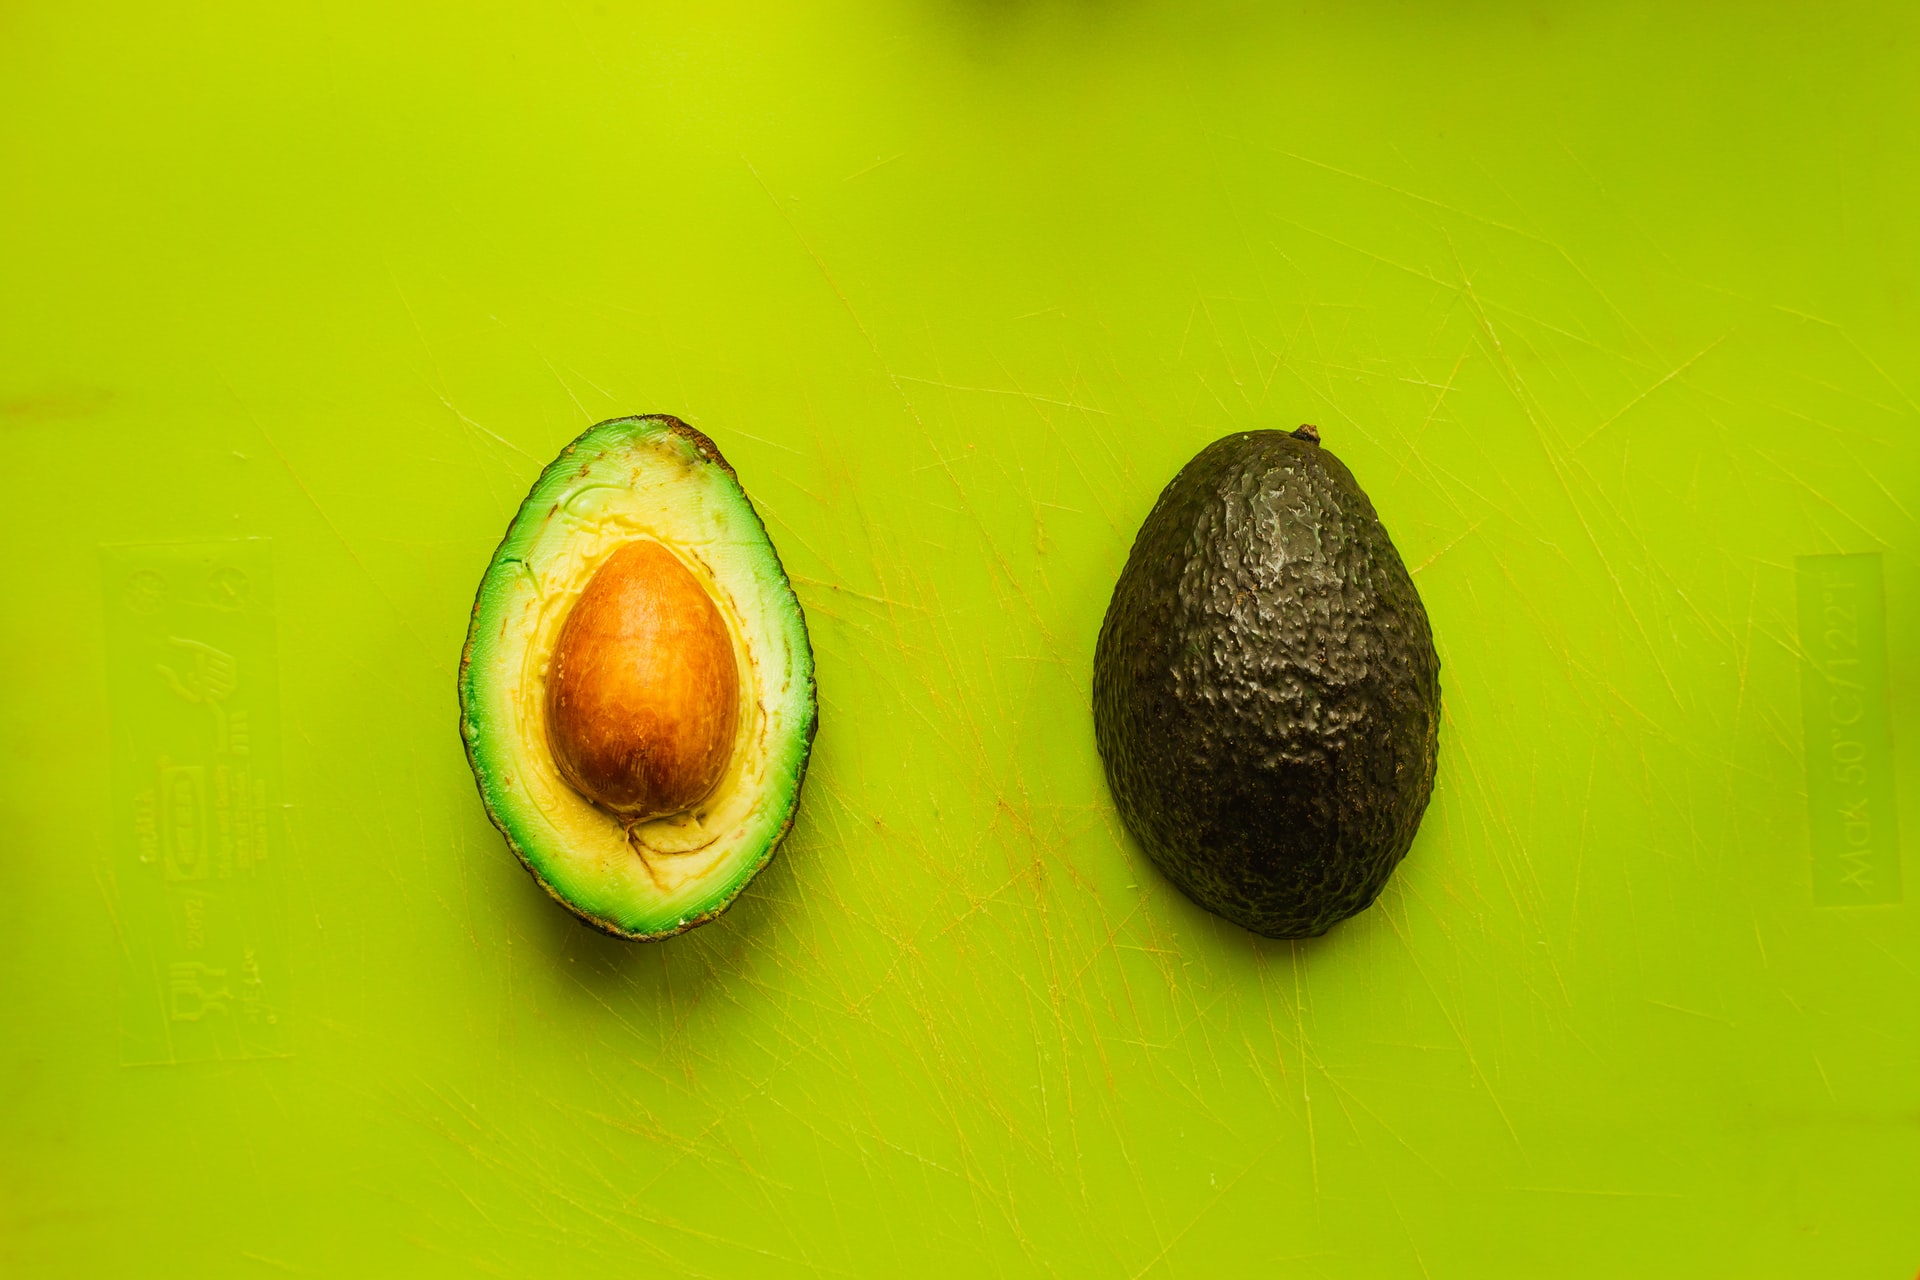 How to Plant Your First Avocado During Quarantine 4